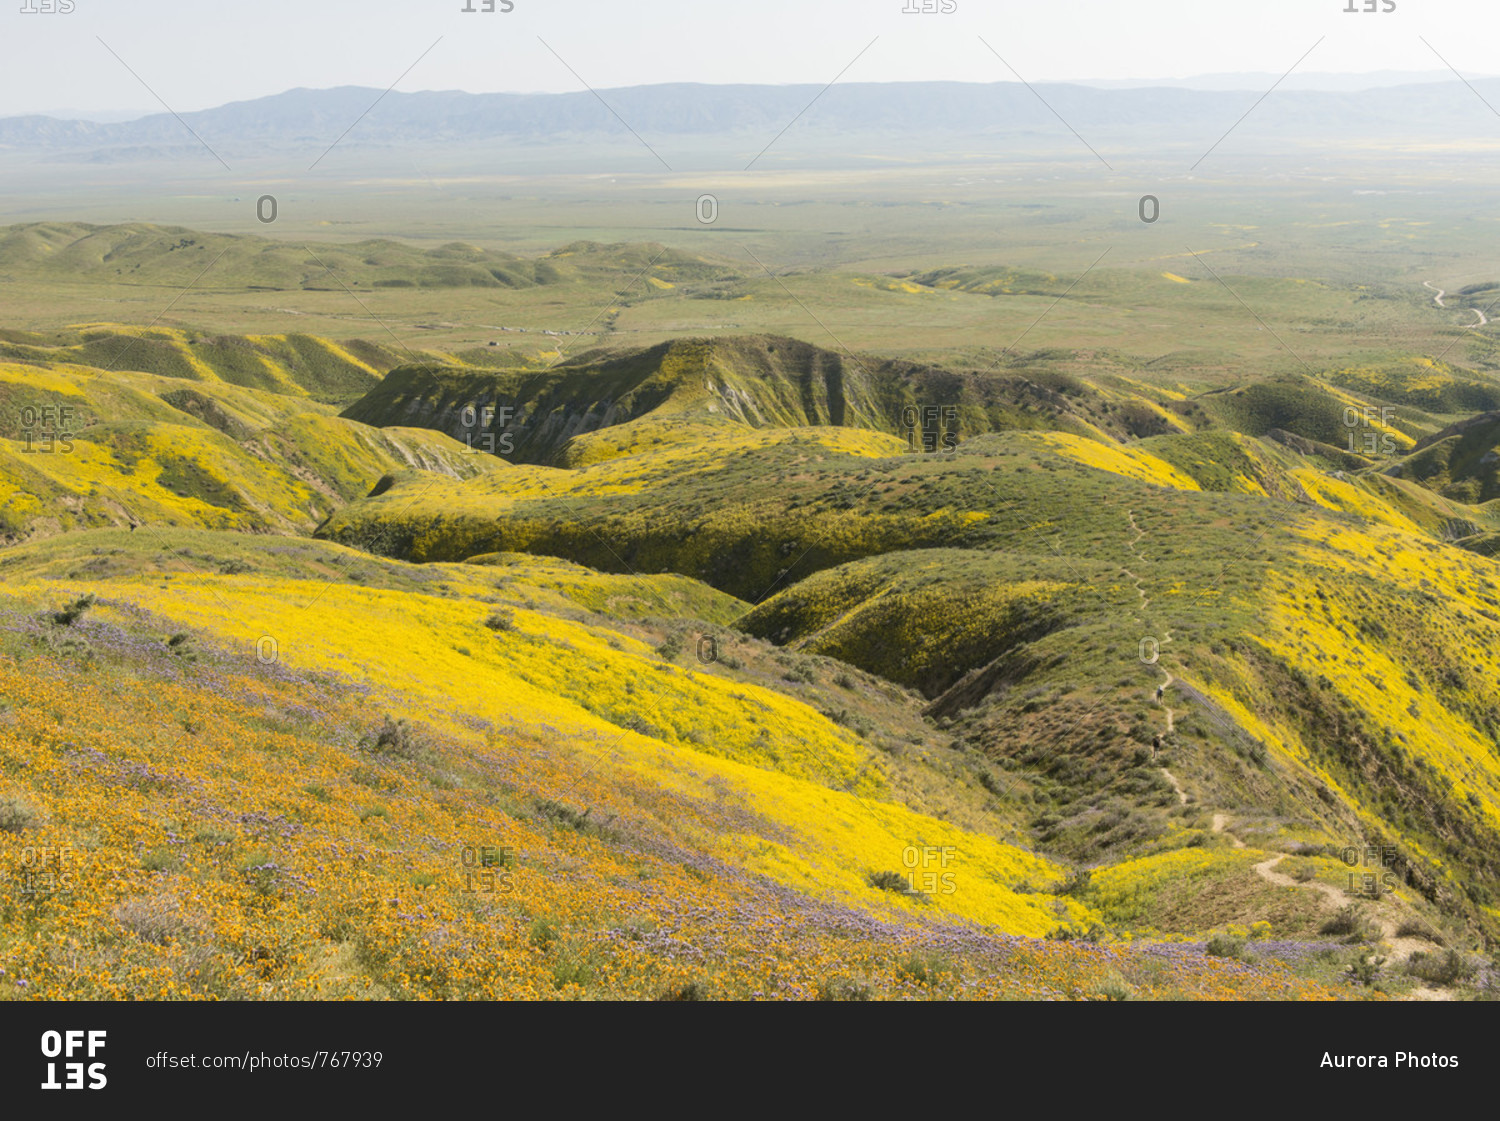 Scenic landscape with yellow wildflowers growing on hills,?Carrizo?Plain National Monument, California, USA